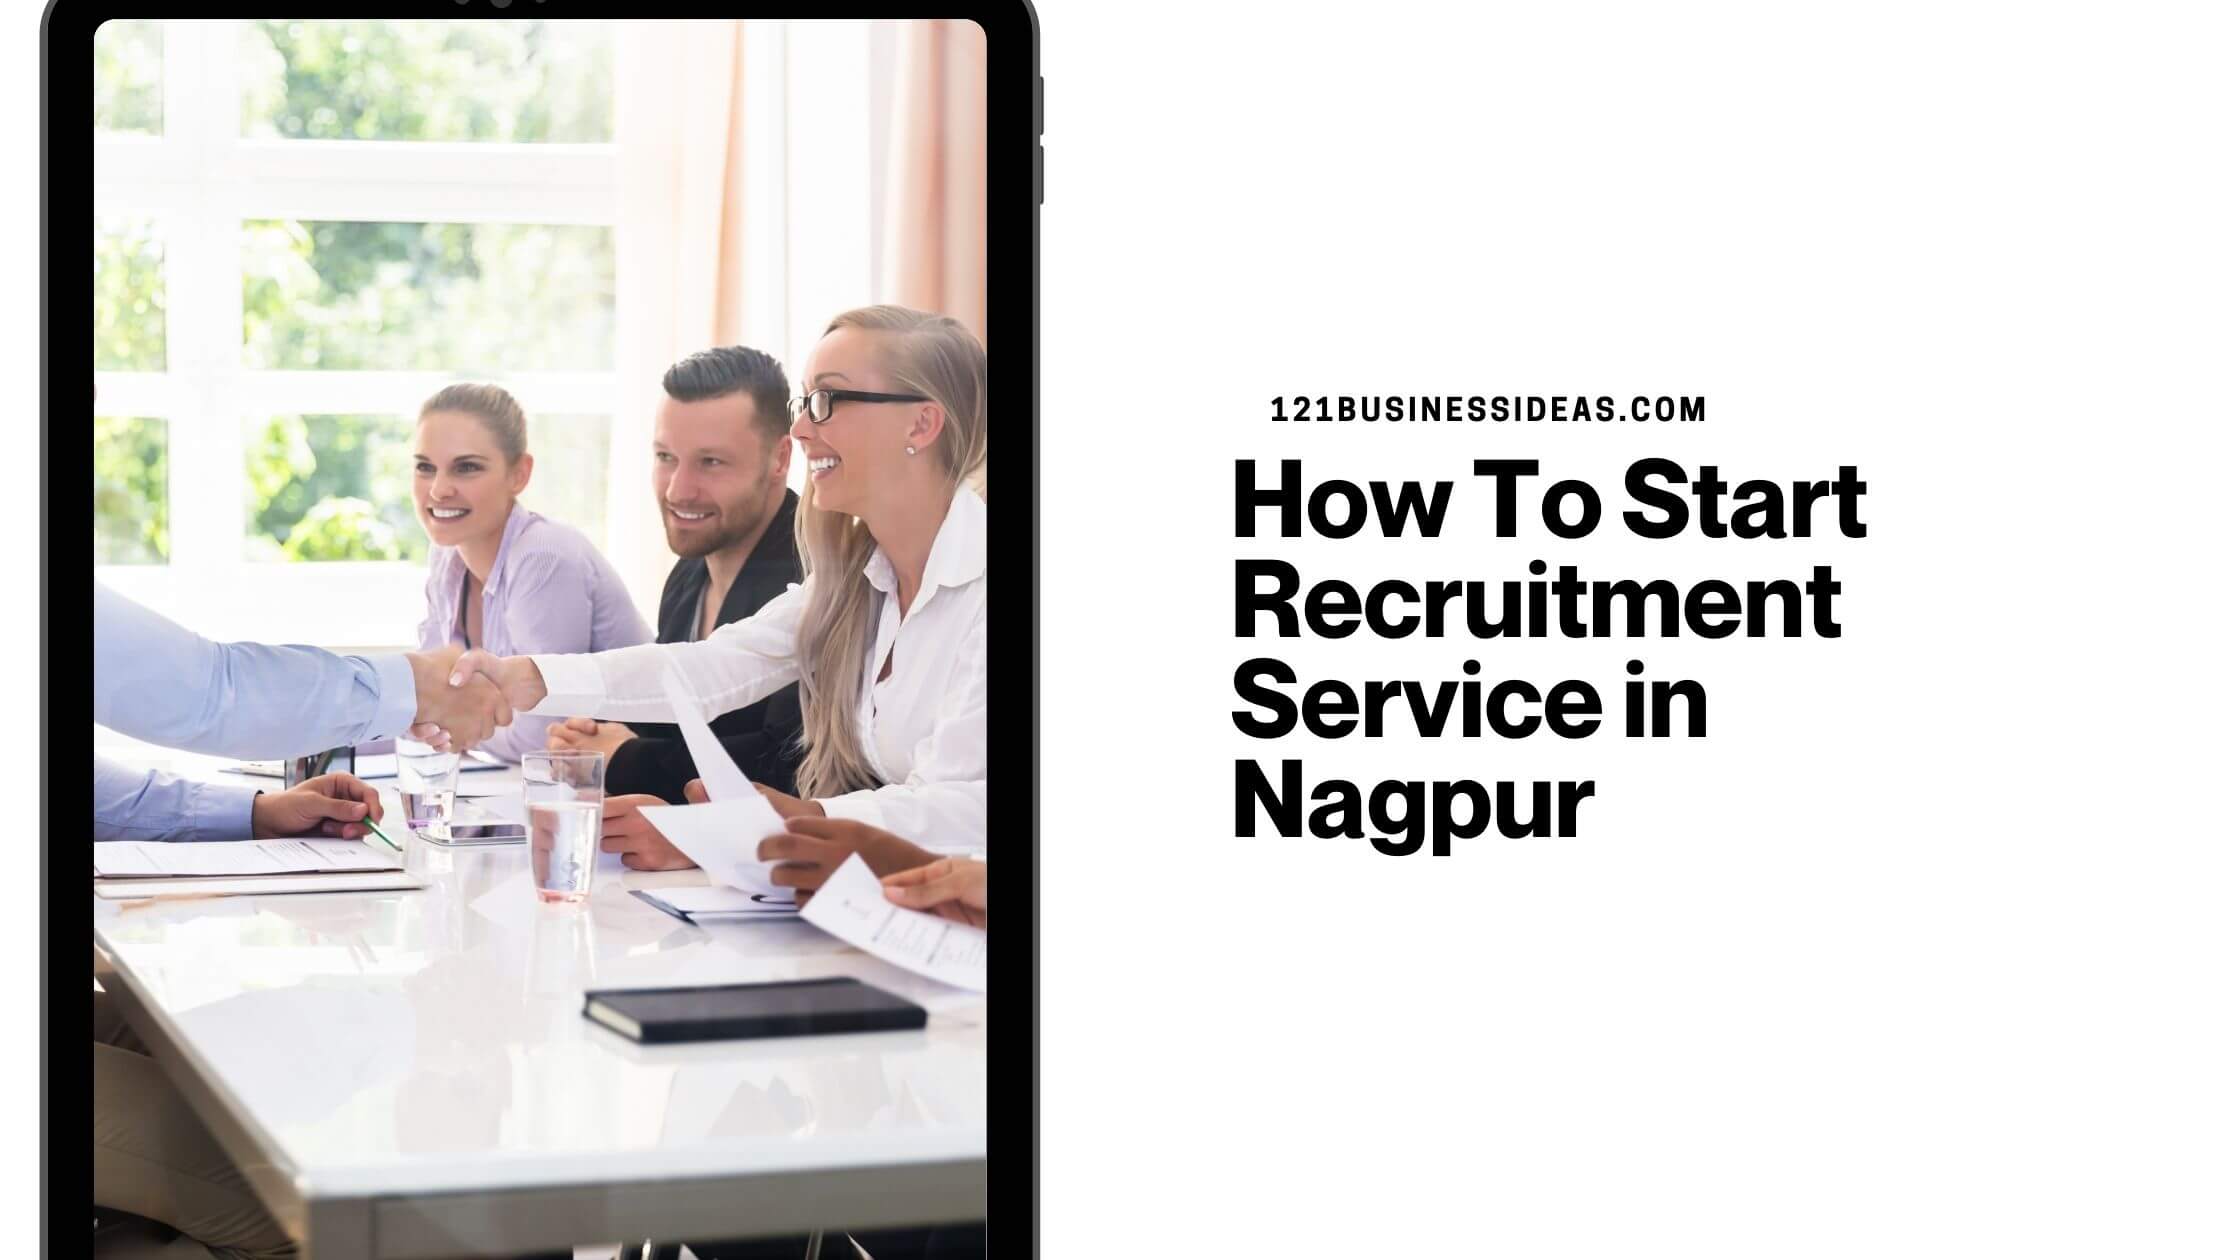 How To Start Recruitment Service in Nagpur (1)